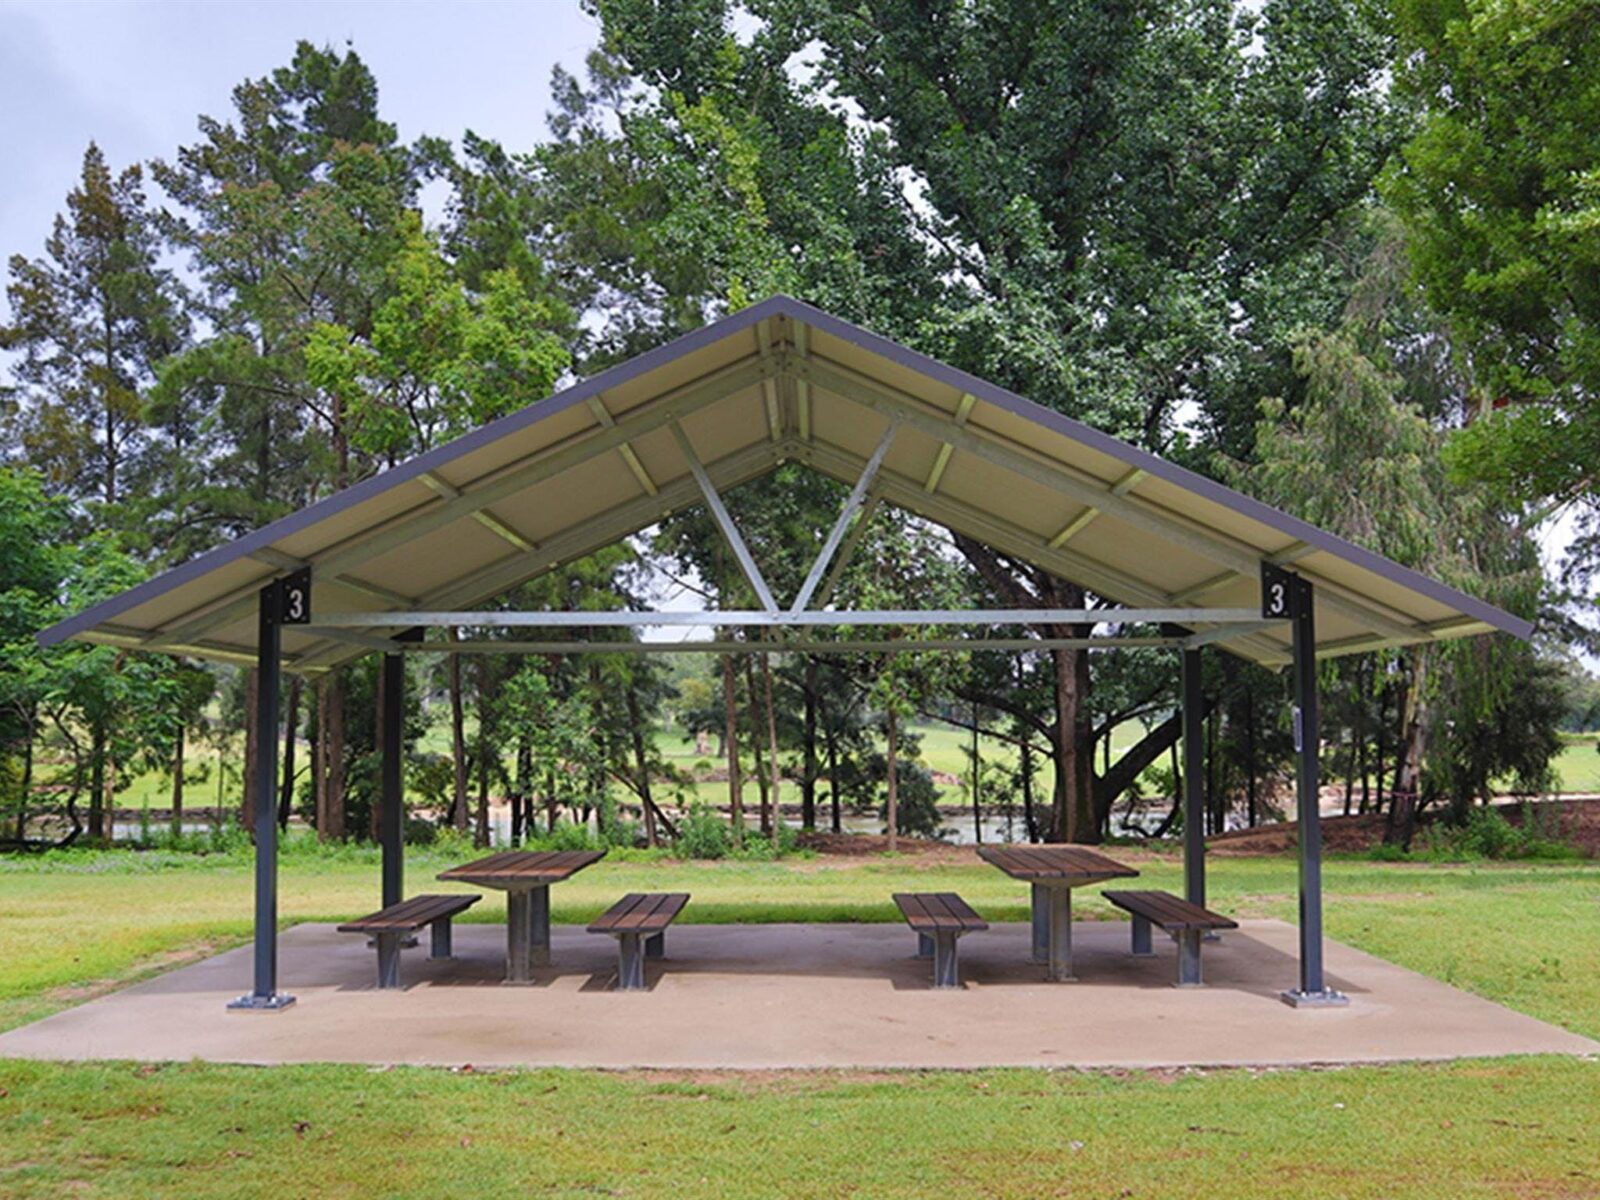 A picnic shed with two picnic tables underneath, at Cattai picnic area in Cattai National Park, on